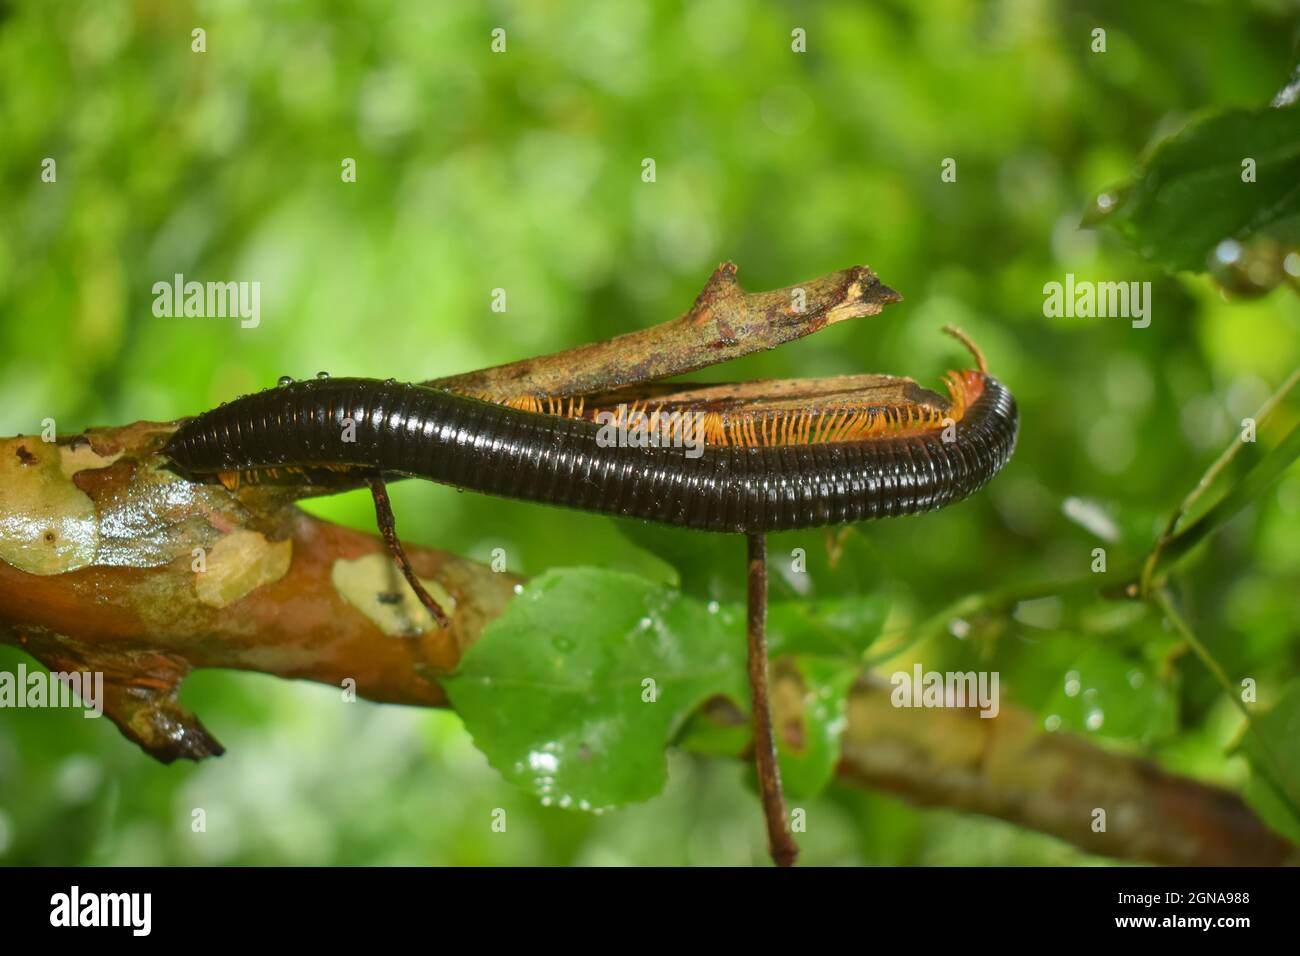 Sri Lankan Millipede is one of the beautiful creation of mother nature. Stock Photo